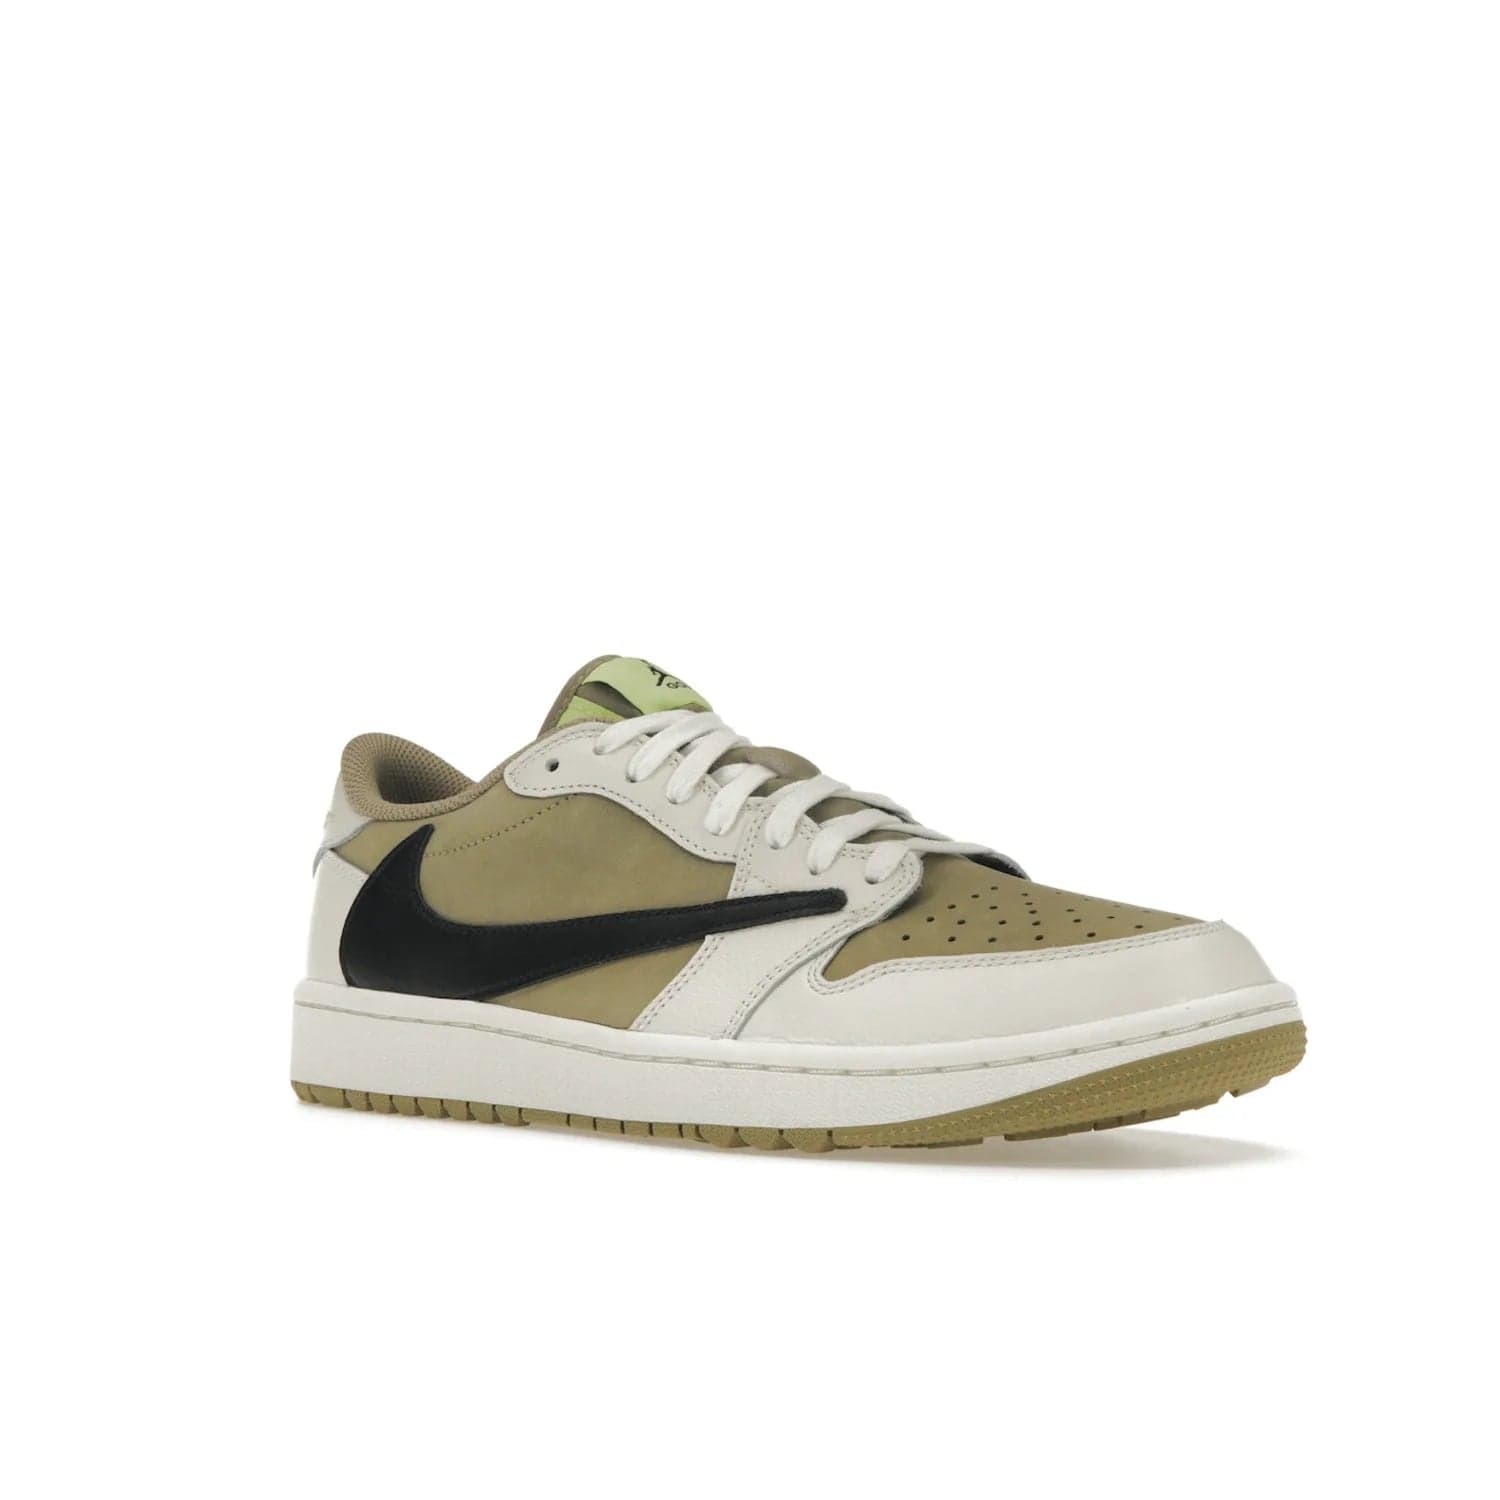 Jordan 1 Retro Low Golf Travis Scott Neutral Olive - Image 5 - Only at www.BallersClubKickz.com - Explore the unique Jordan 1 Retro Low Golf Travis Scott Neutral Olive, an olive-green sneaker collaboration between the iconic Jordan Brand and music royalty, Travis Scott. This special pair is tailored for the golf course with altered traction, hardened rubber, and a sleek style perfect for everyday wear. Get your pair and impress the crowd with its signature earth tones.